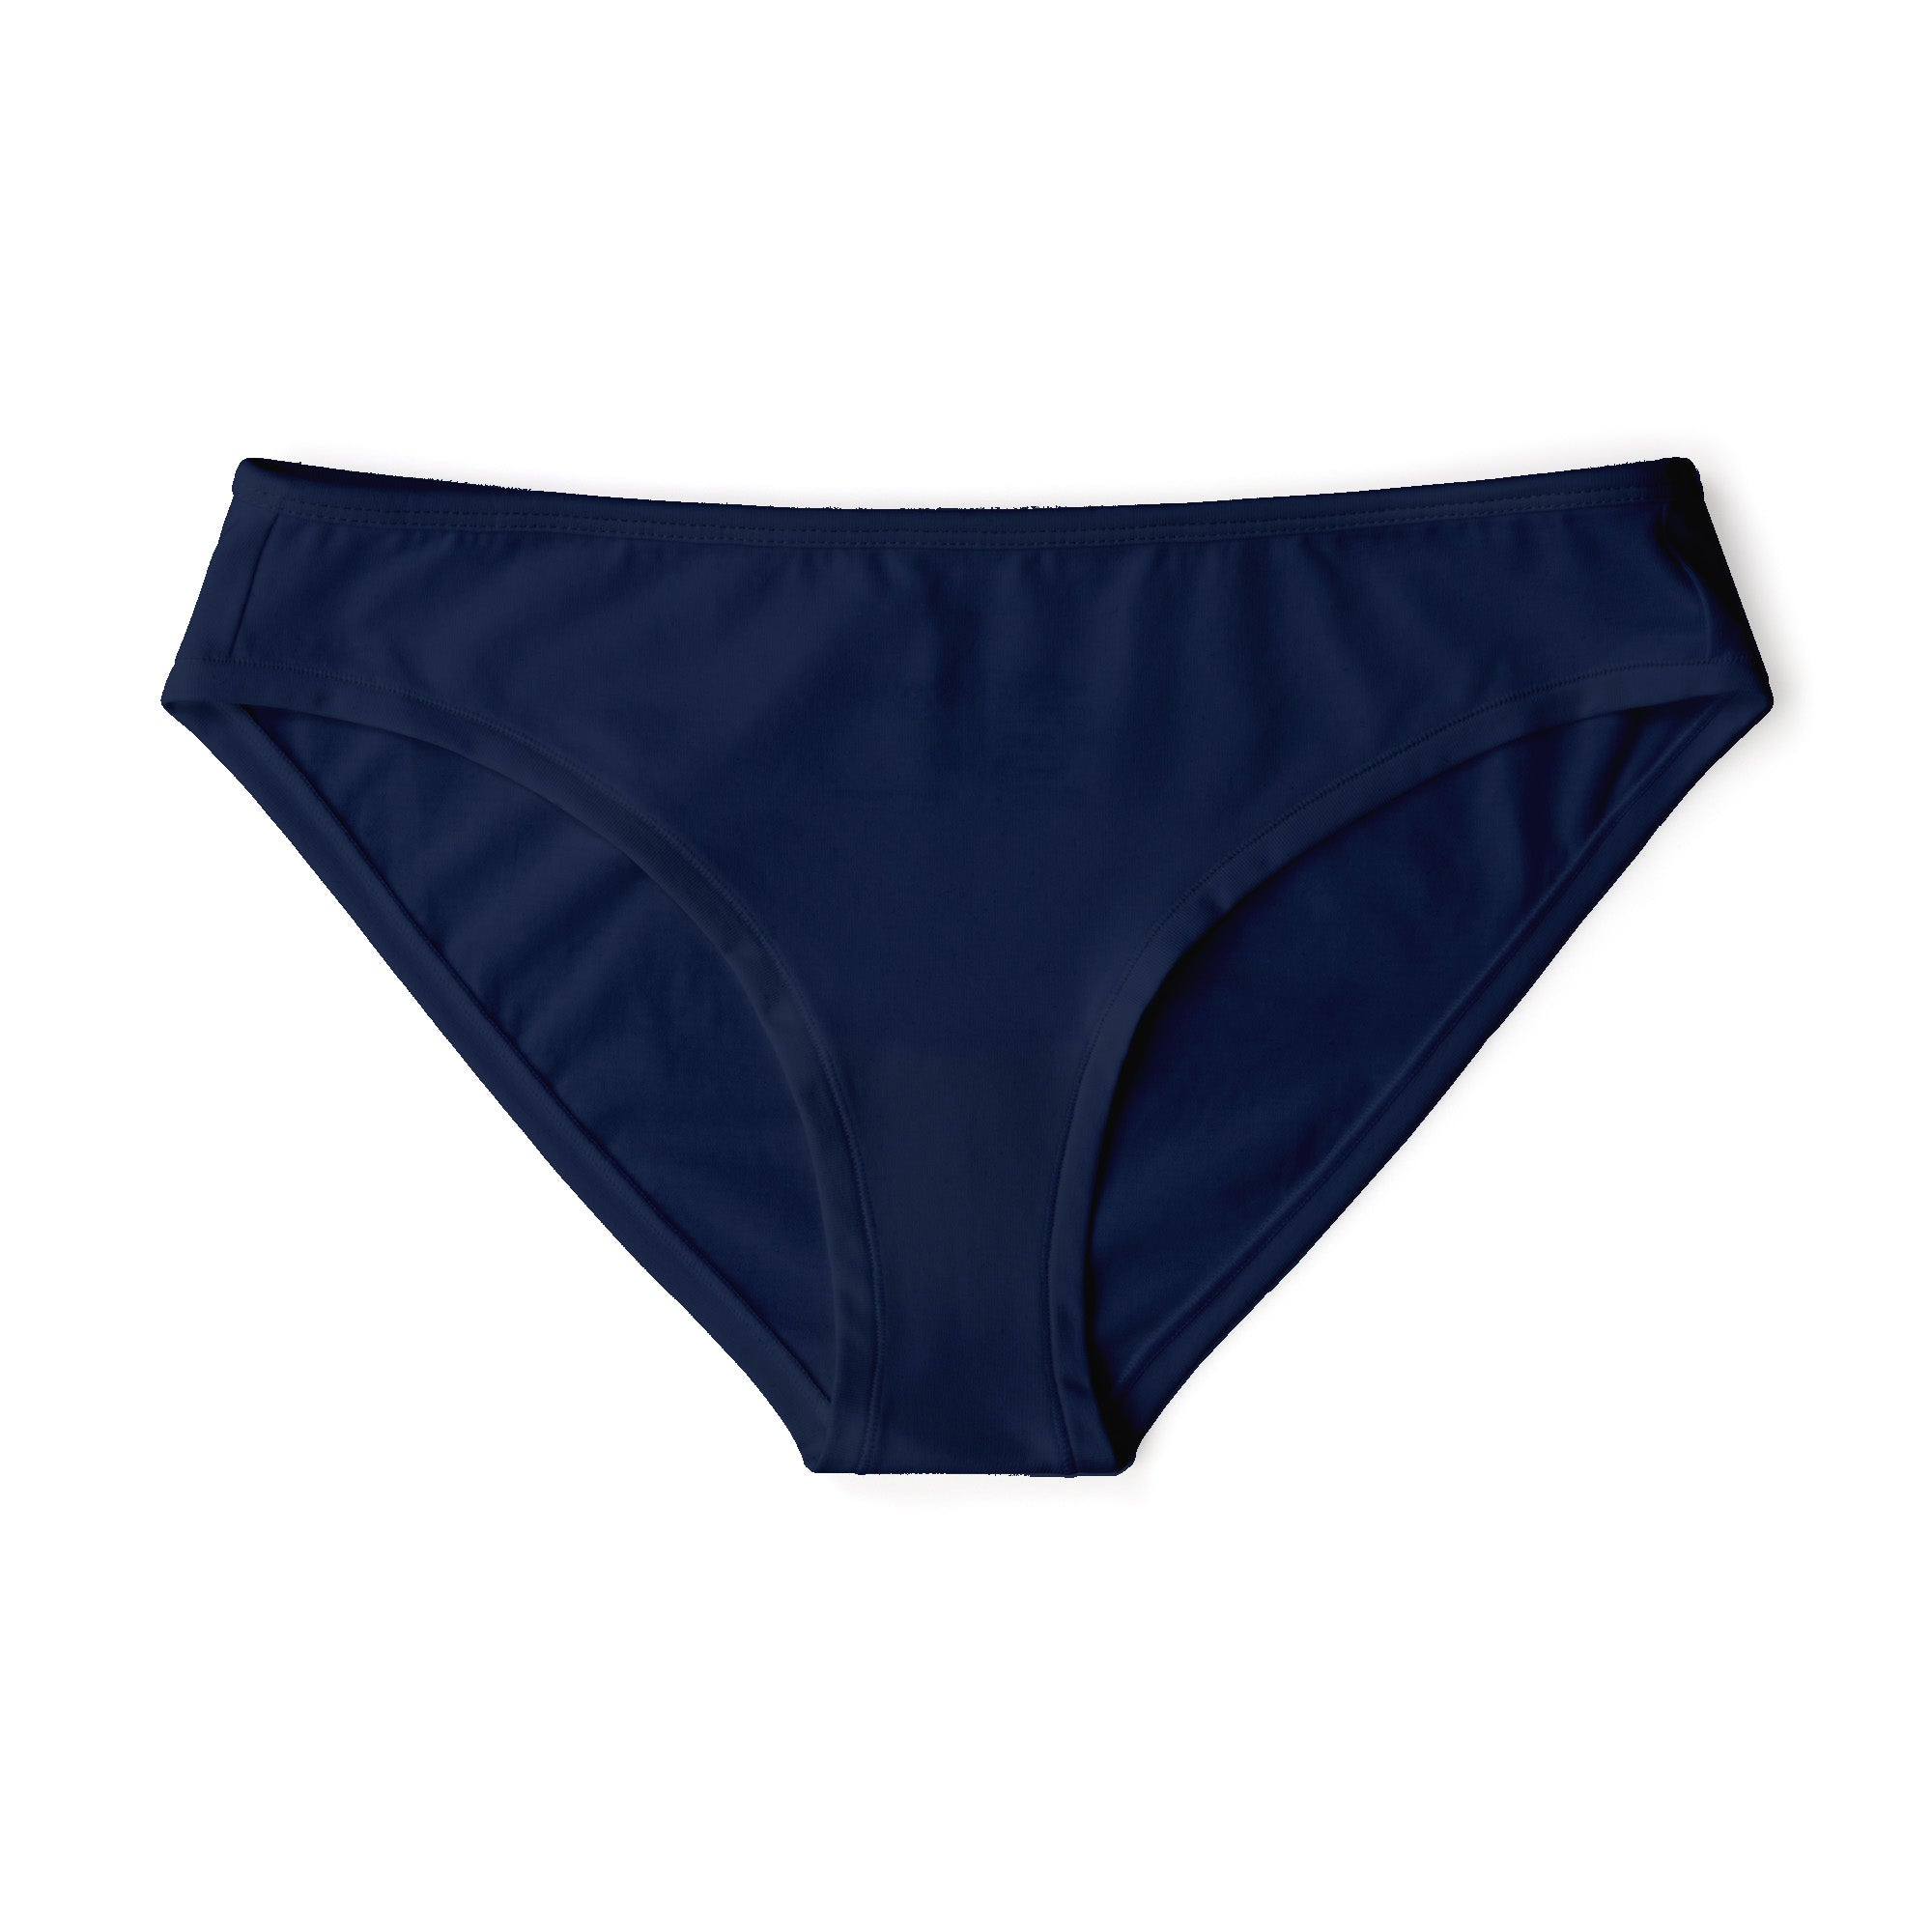 Ladies Mid rise briefs, navy, front image